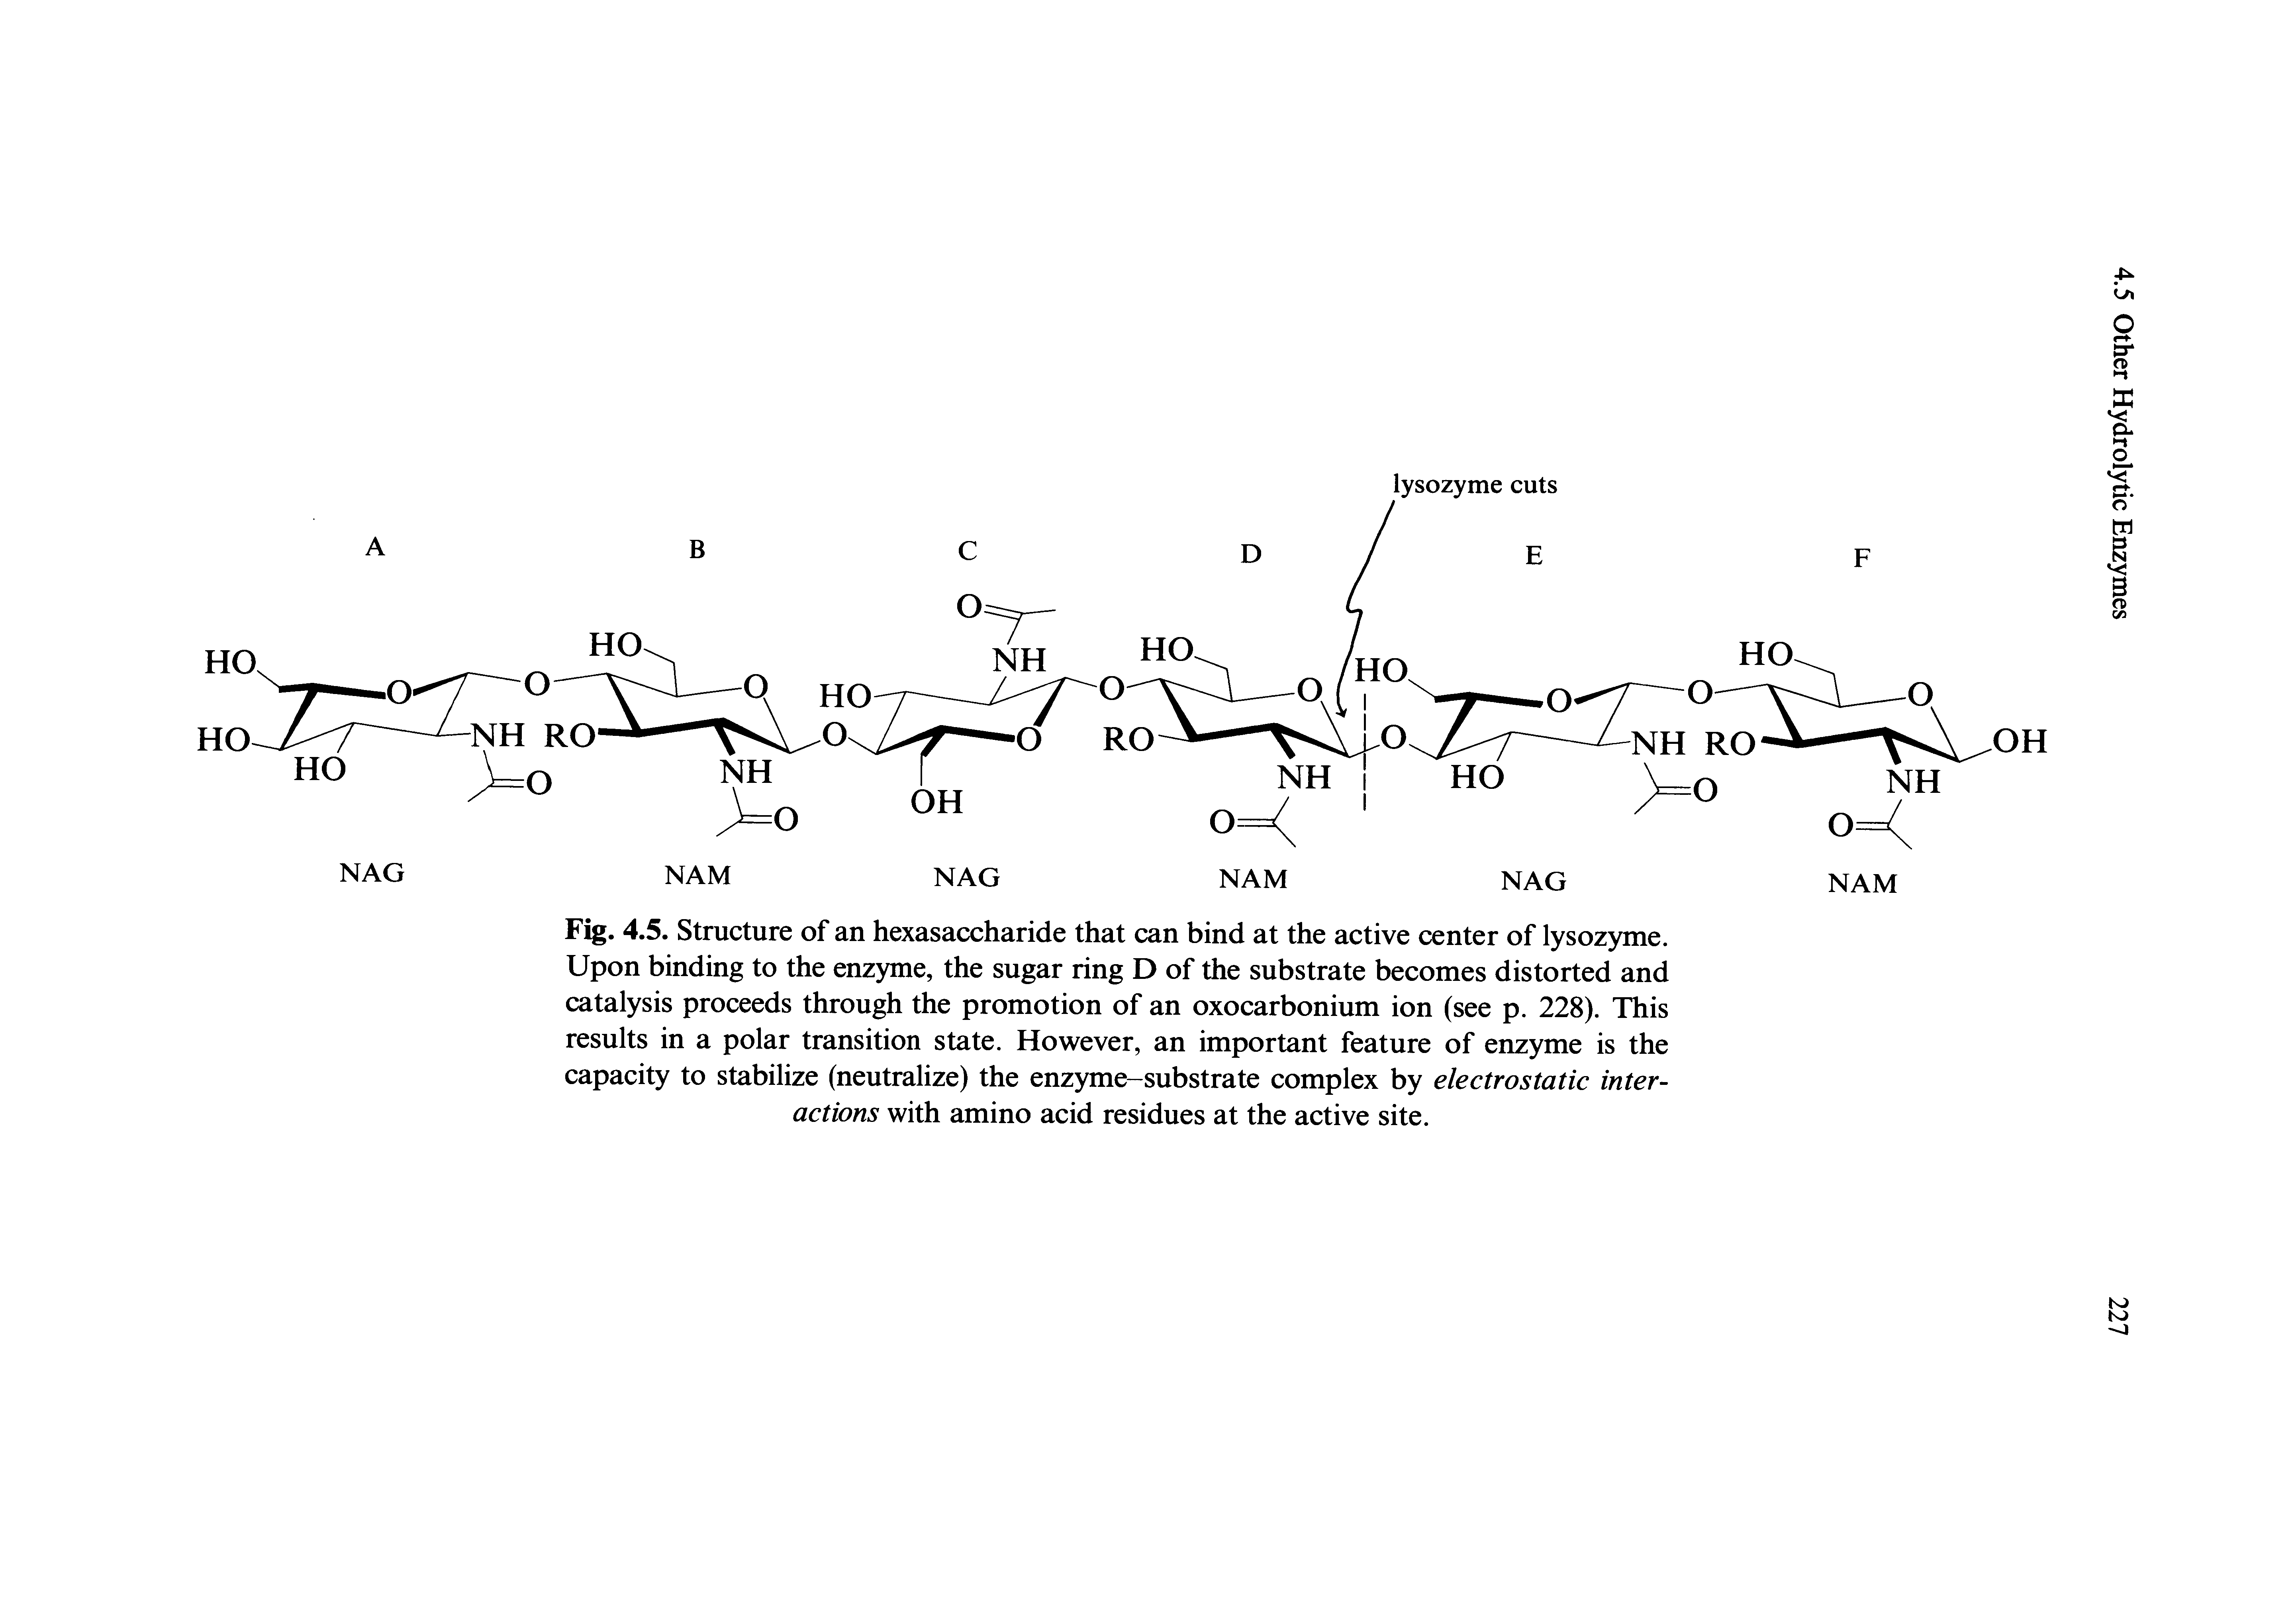 Fig. 4.5. Structure of an hexasaccharide that can bind at the active center of lysozyme. Upon binding to the enzyme, the sugar ring D of the substrate becomes distorted and catalysis proceeds through the promotion of an oxocarbonium ion (see p. 228). This results in a polar transition state. However, an important feature of enzyme is the capacity to stabilize (neutralize) the enzyme-substrate complex by electrostatic interactions with amino acid residues at the active site.